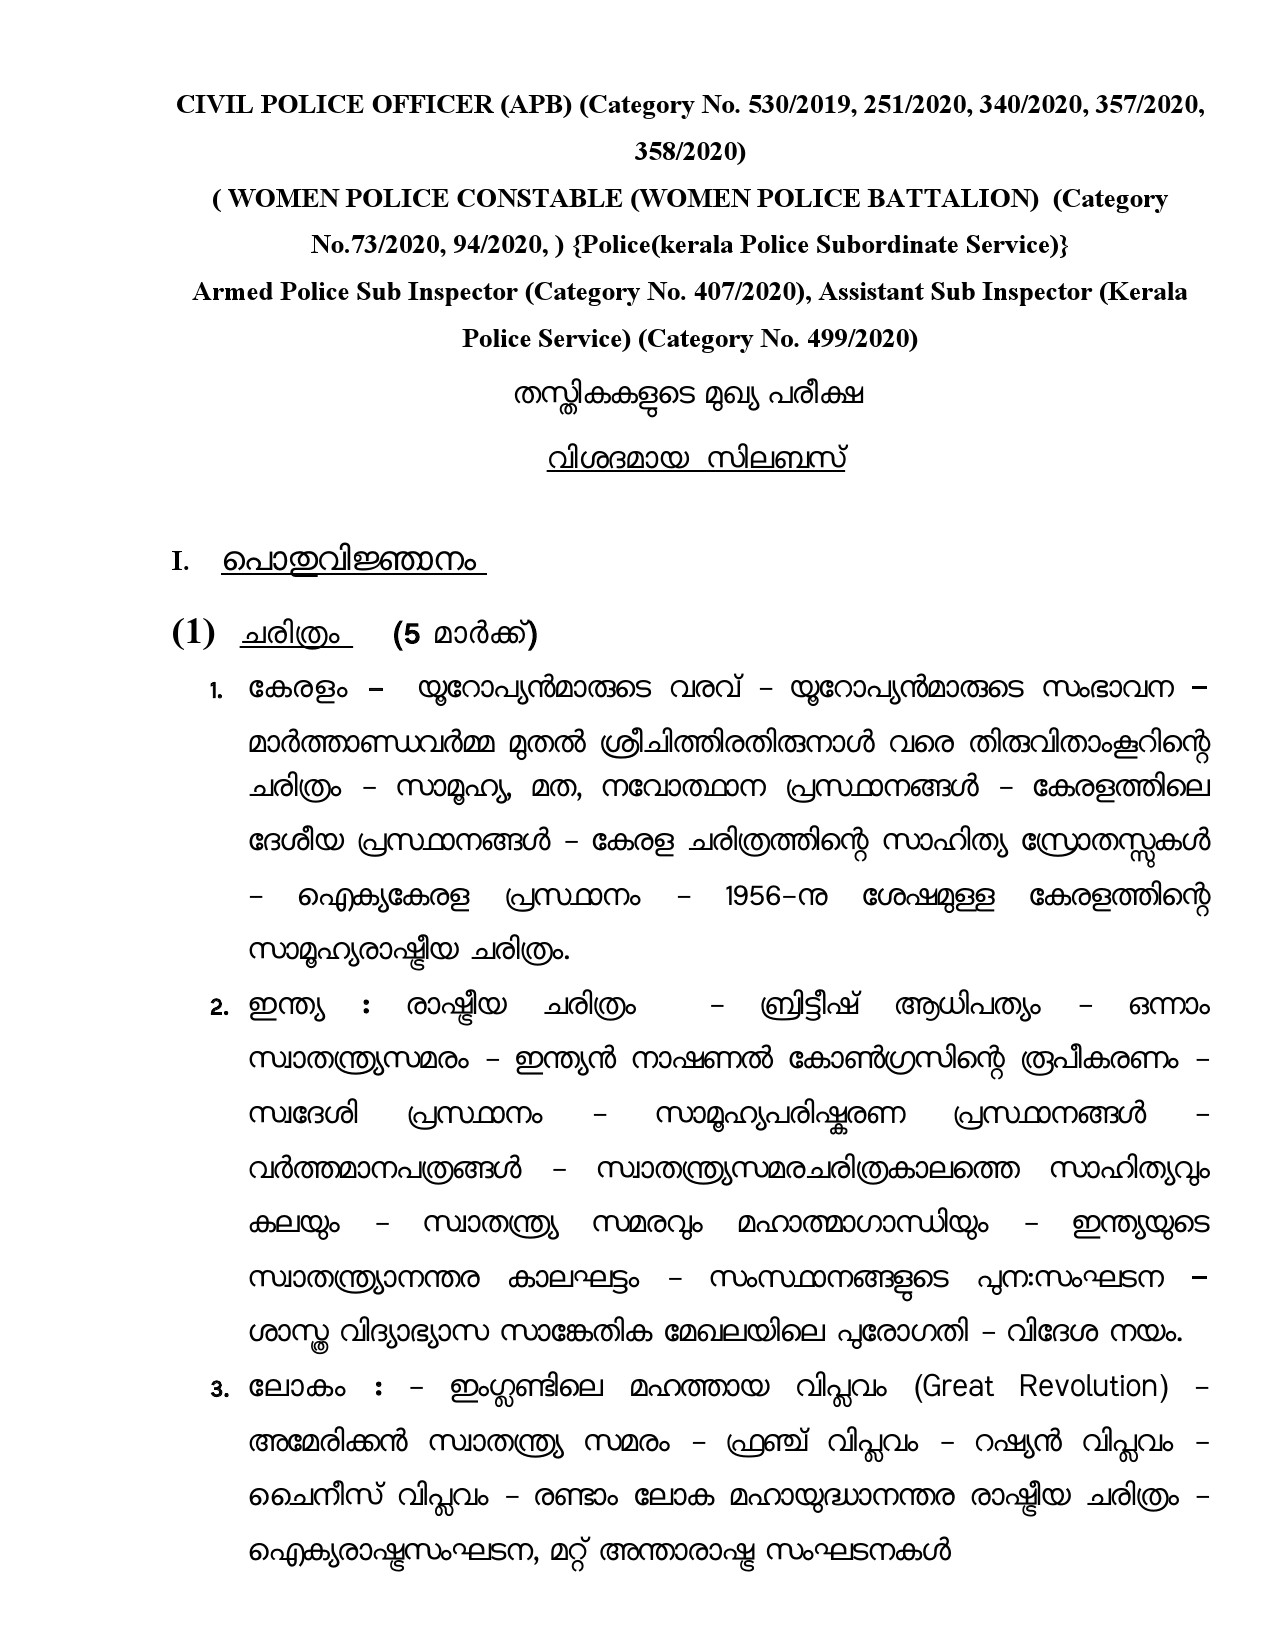 Civil Police Officer Final Examination Syllabus For Plus Two Level - Notification Image 2